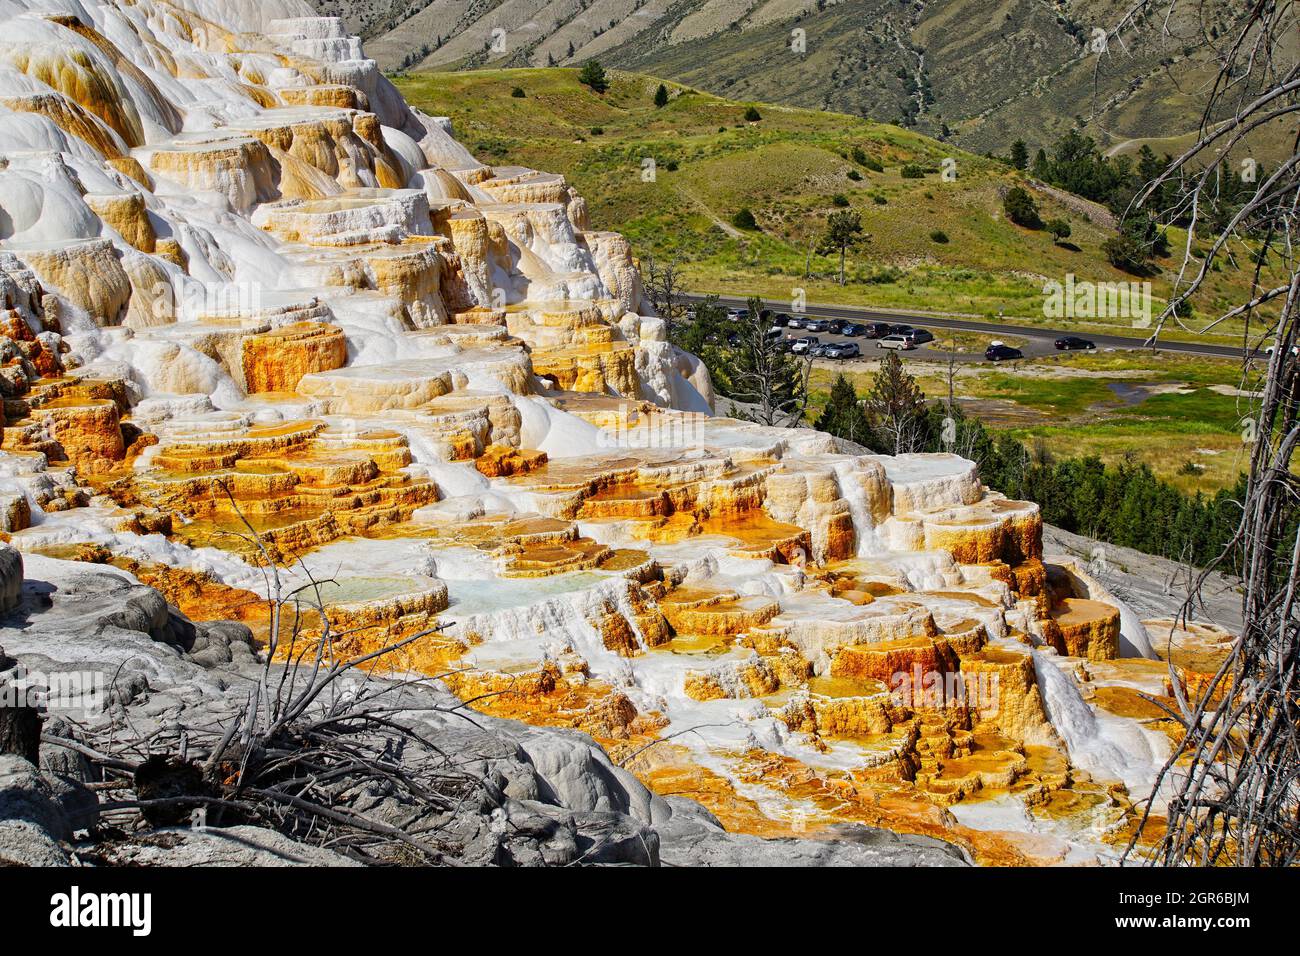 Geothermic Staircase - The astounding geothermic lower terraces at Mammoth Hot Springs in Yellowstone National Park Stock Photo